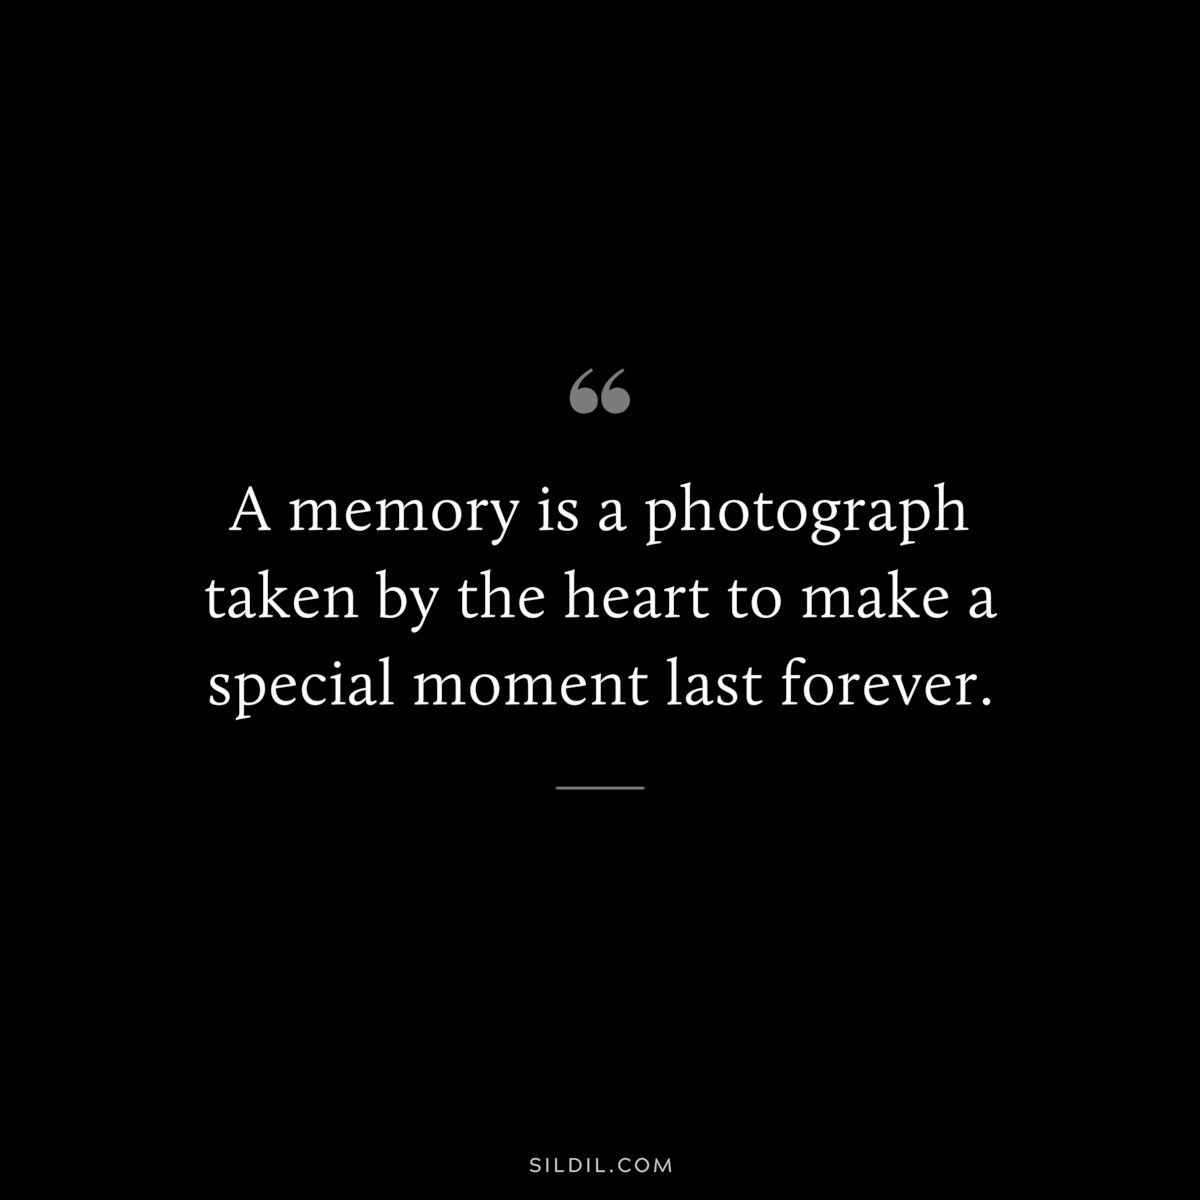 A memory is a photograph taken by the heart to make a special moment last forever.